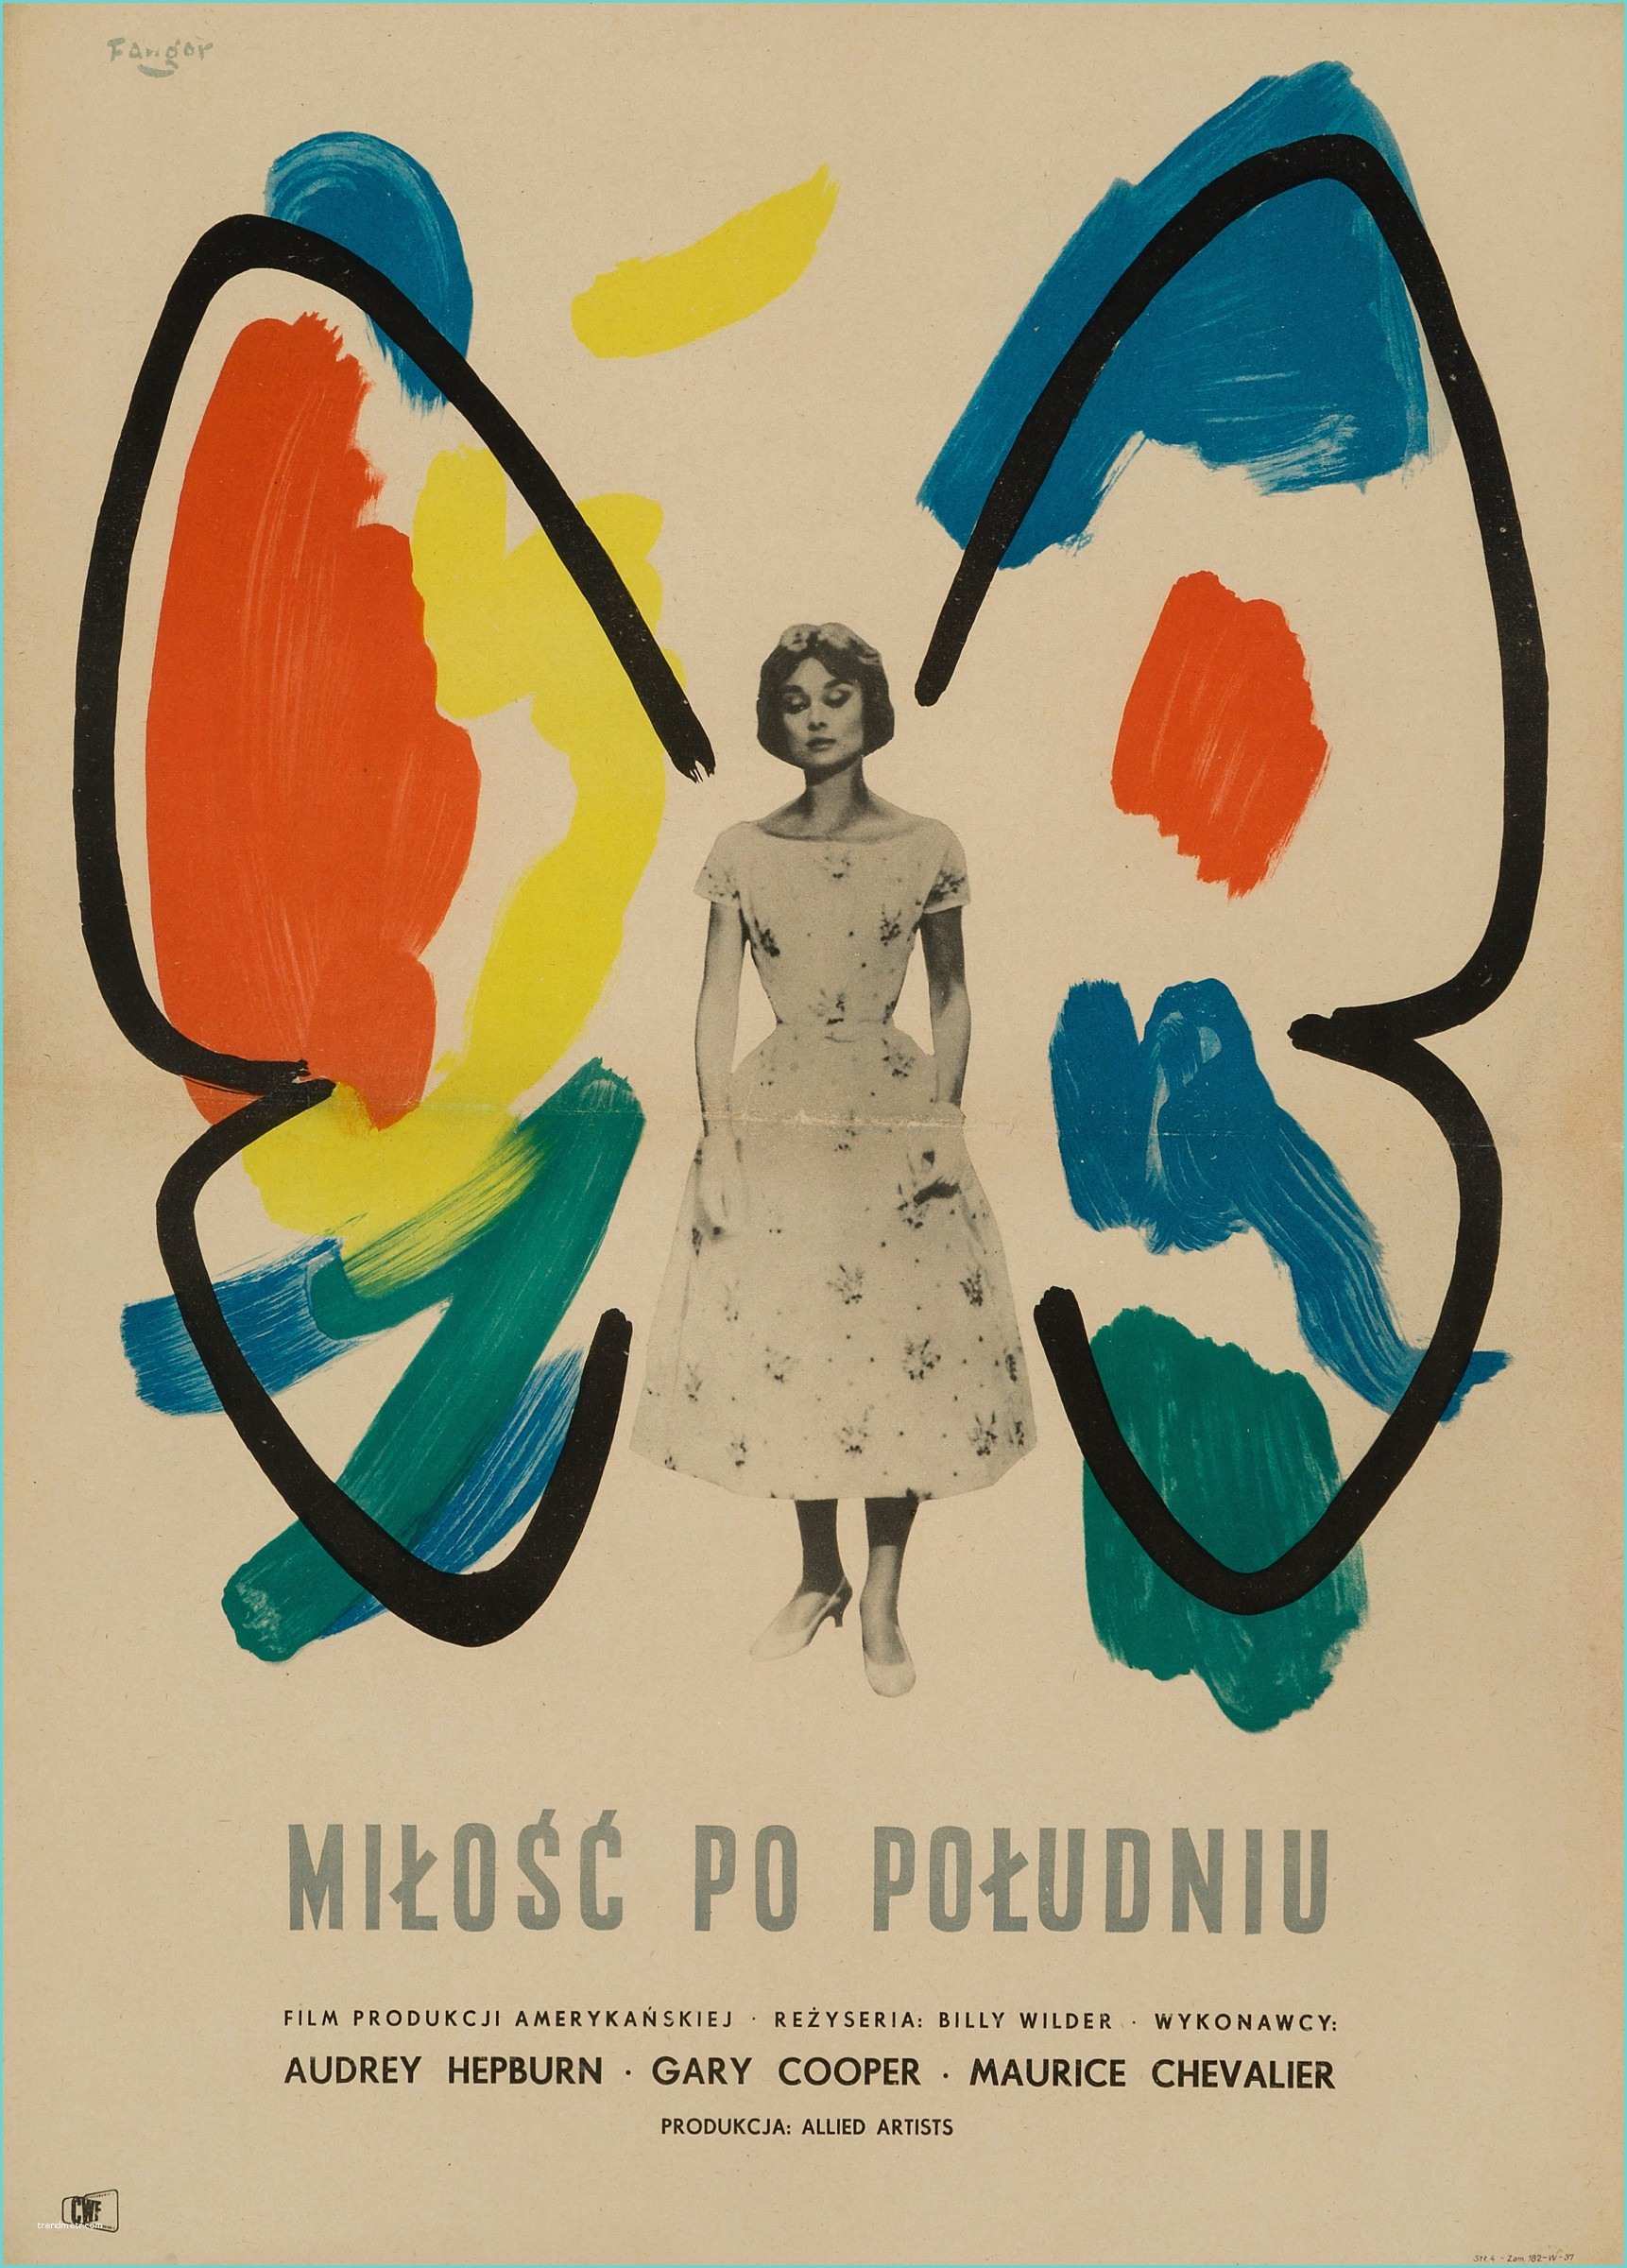 Allposters Return Policy Wojciech Fangor Love In the afternoon 1959